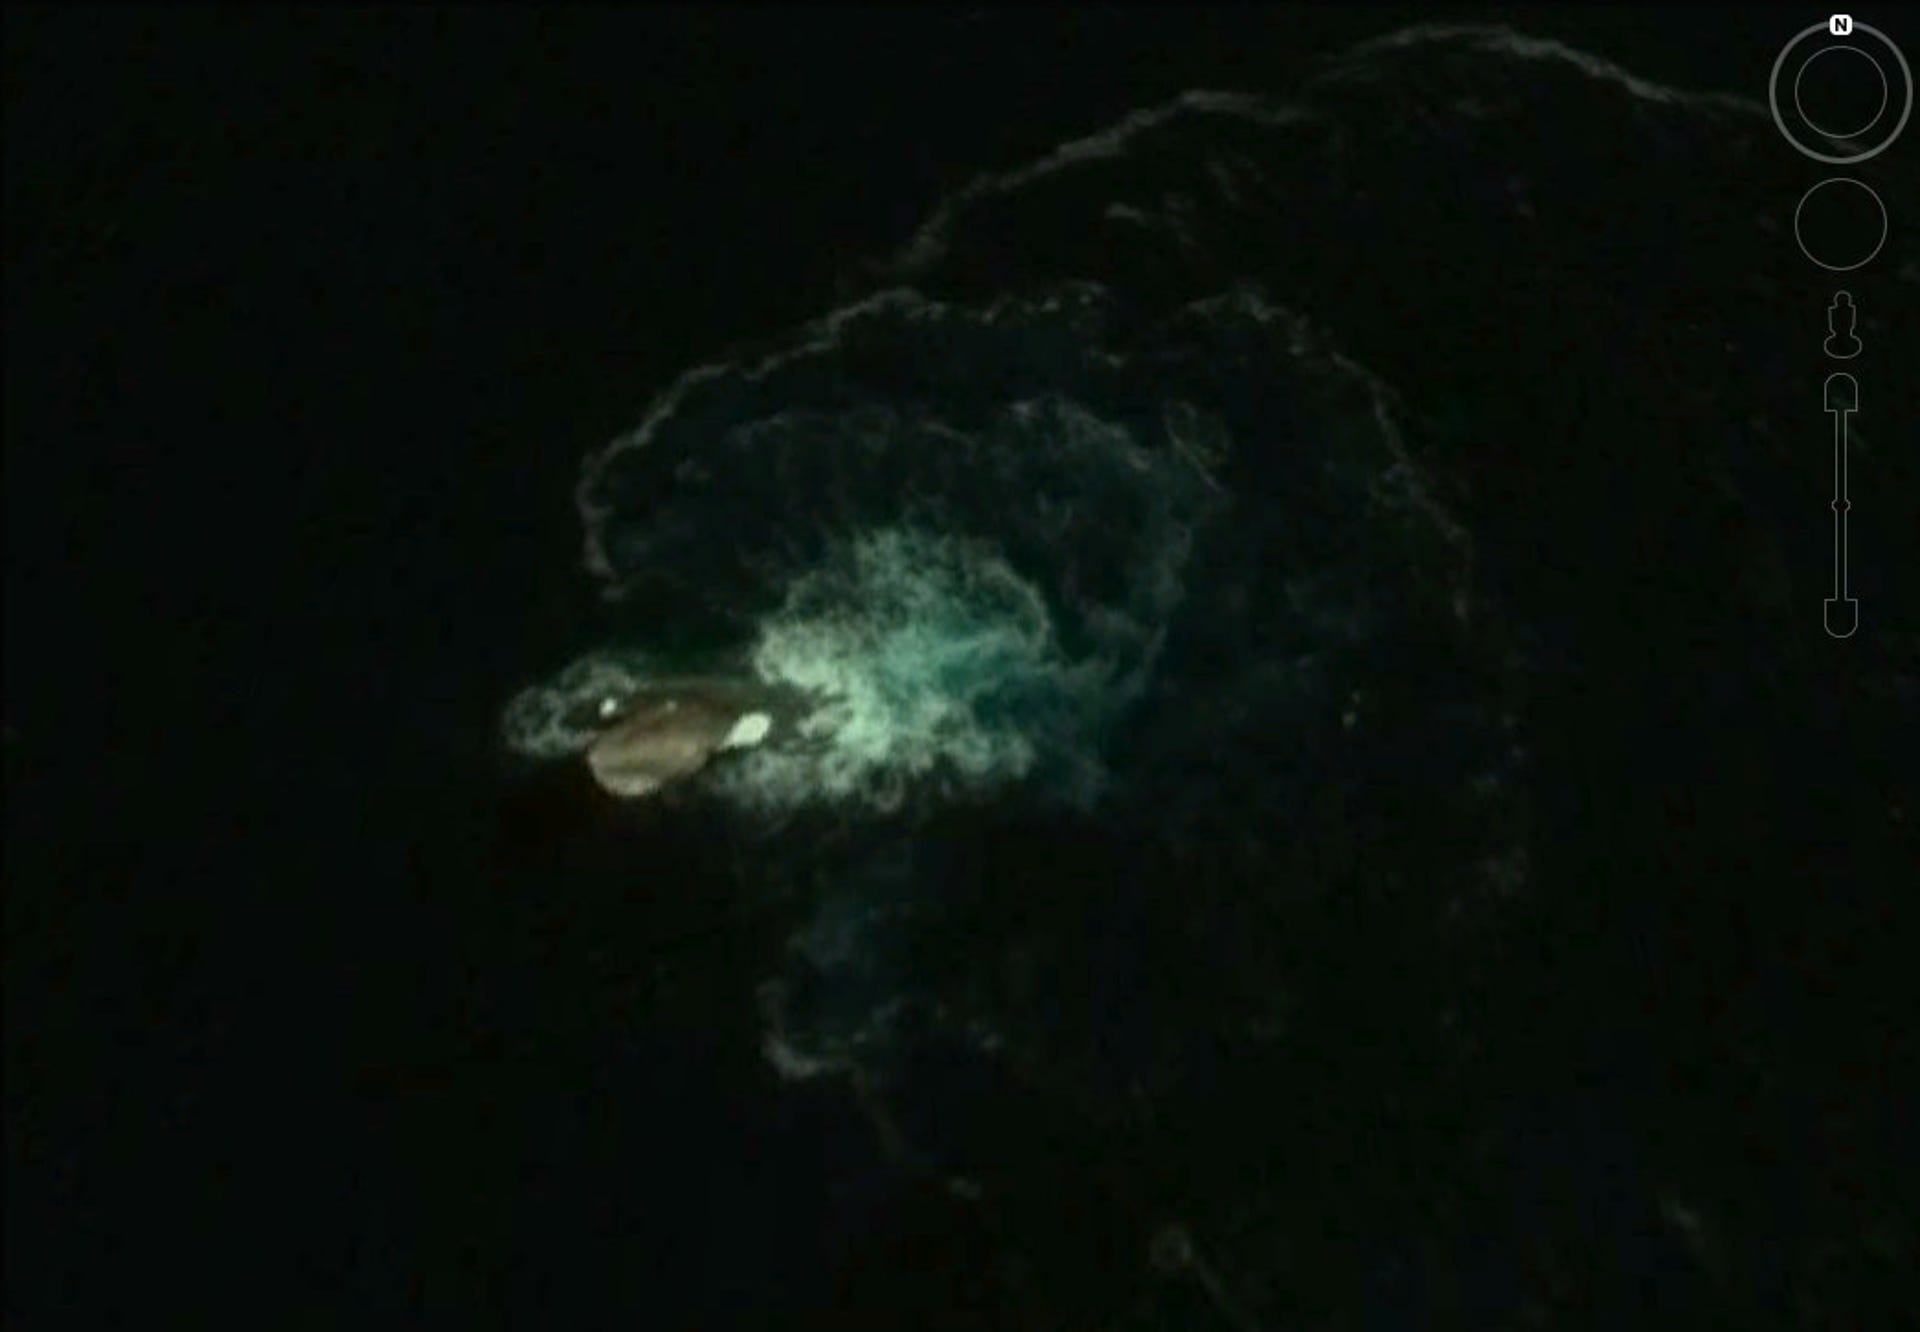 Somebody has just spotted this terrifying sea monster on Google Earth